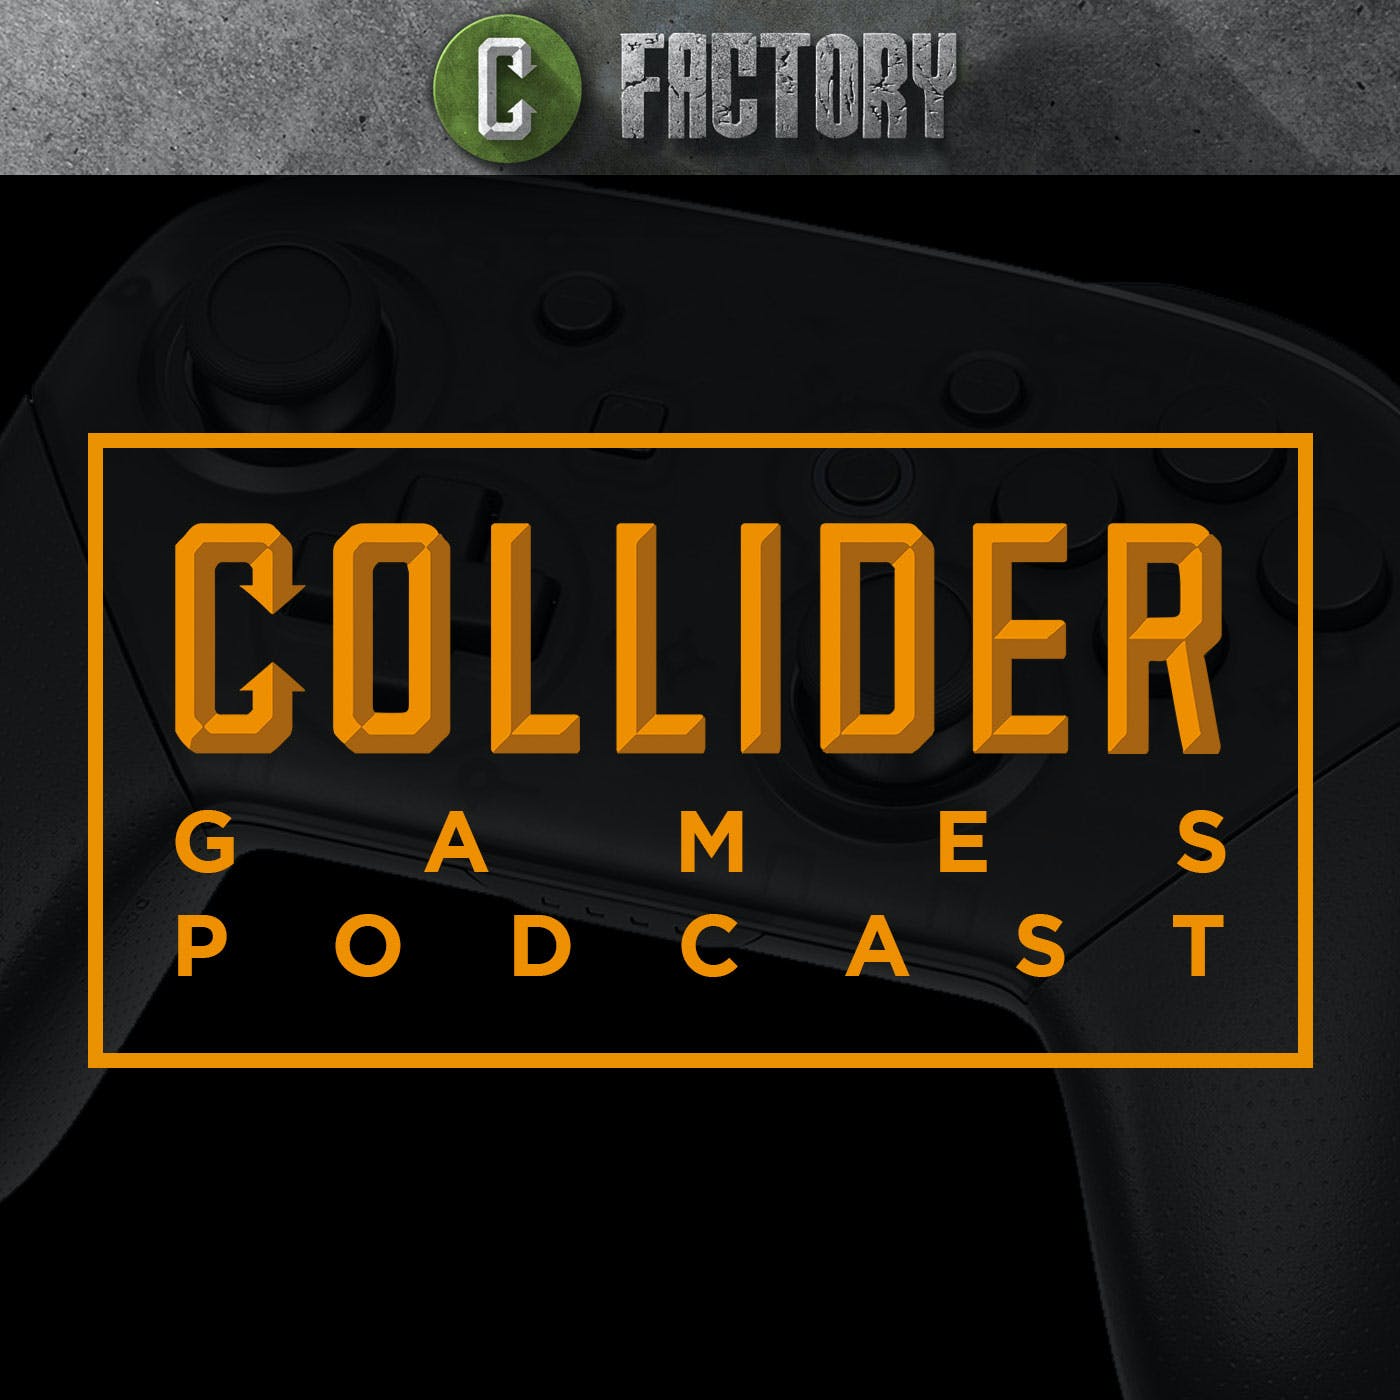 Unreal 5 PS5 Demo, Tony Hawk Pro Skater Remake, Ghost of Tsushima Gameplay, Half Life: Alyx - Collider Games Podcast